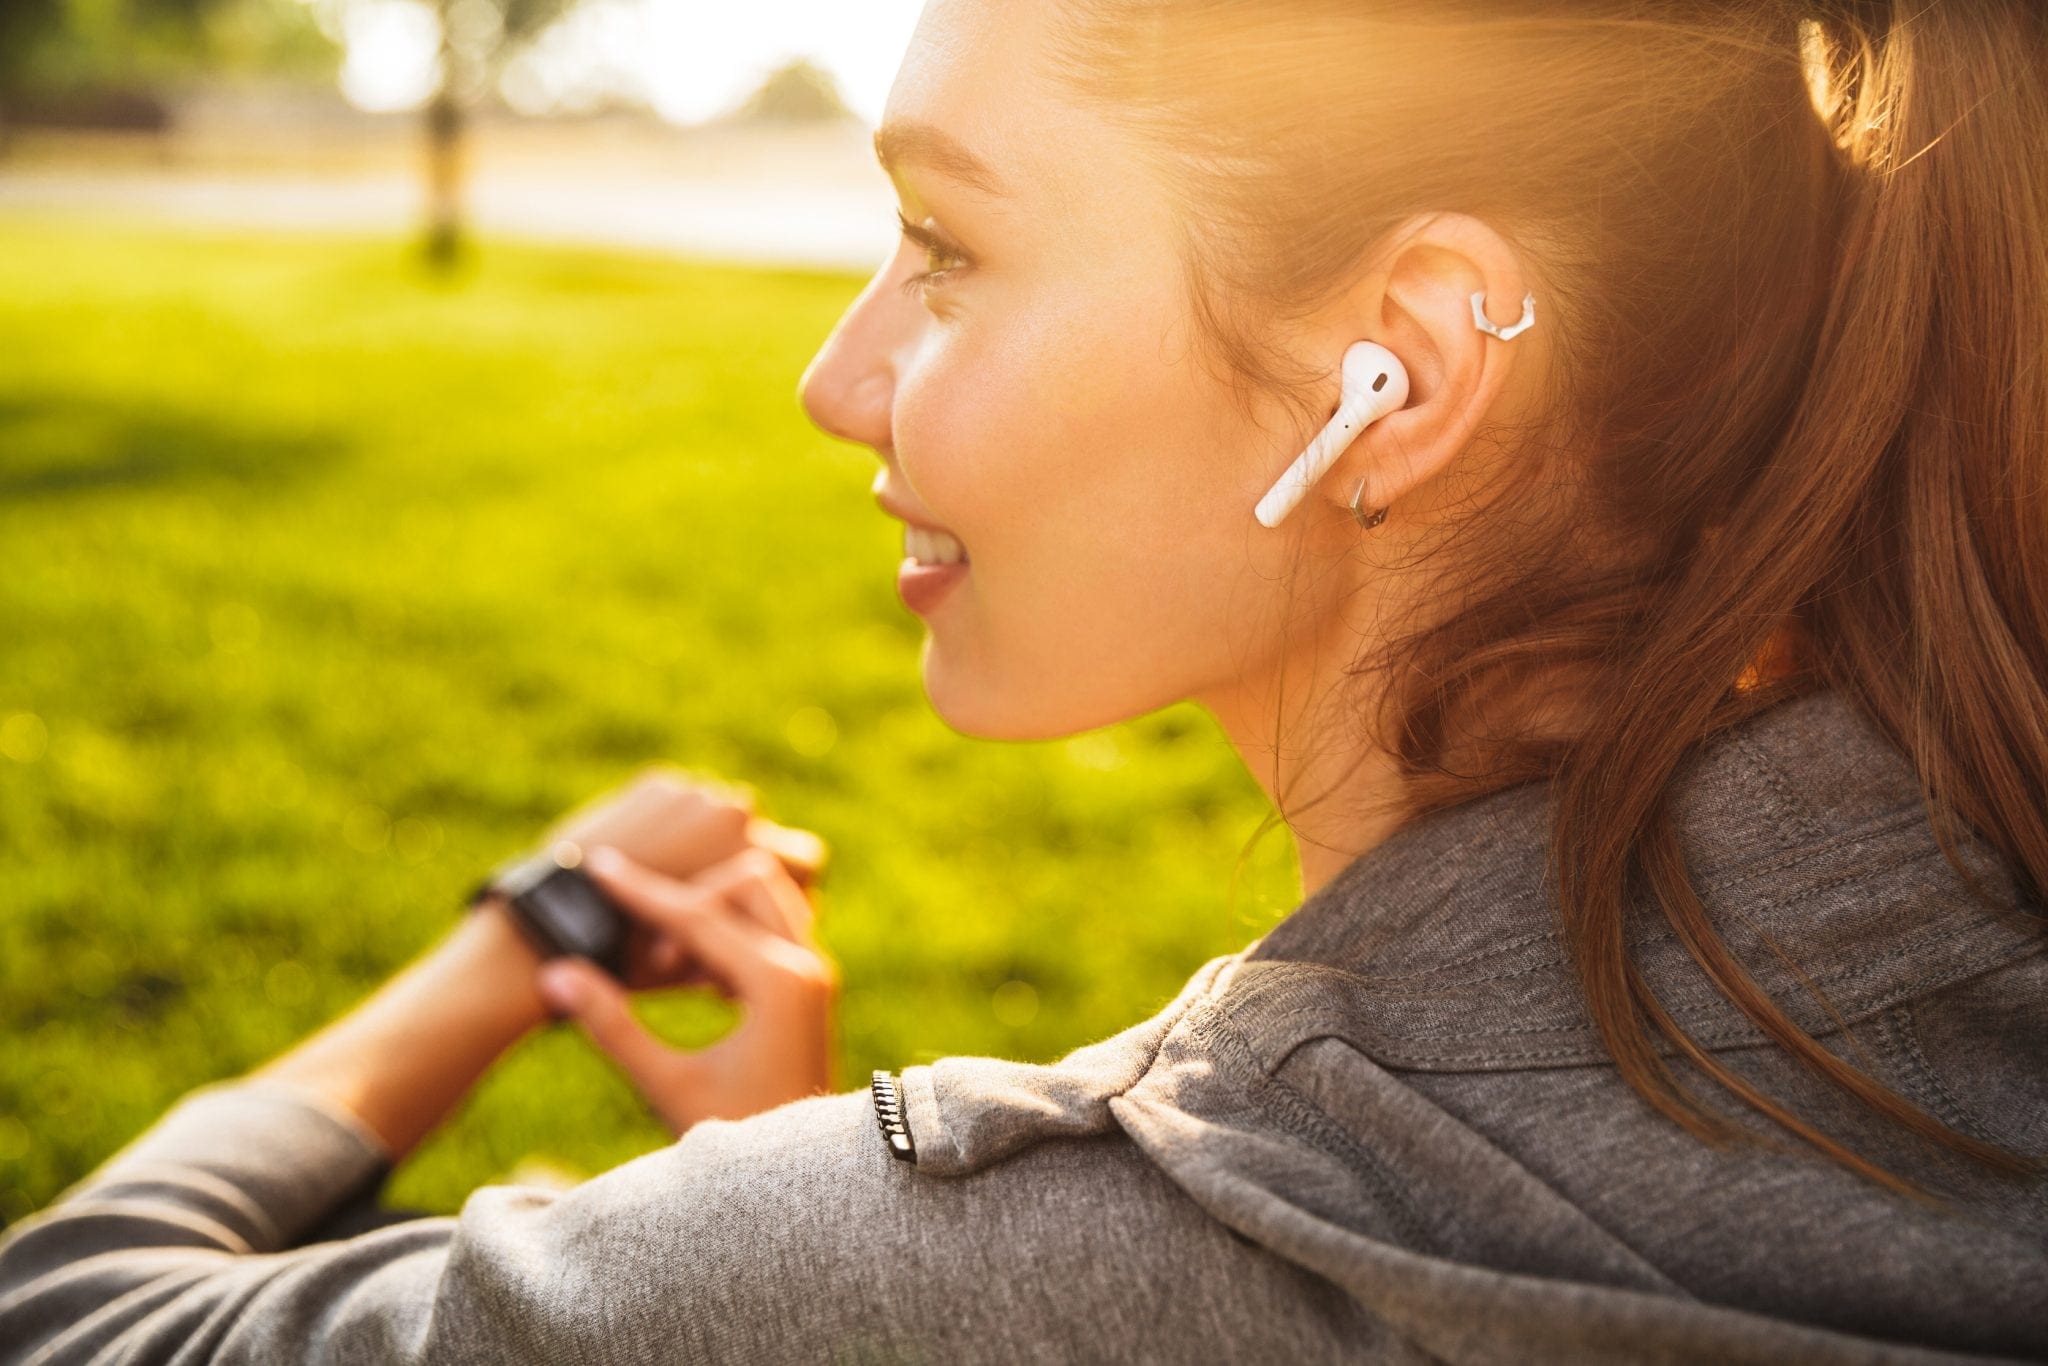 Can Wearing Earbuds Cause Hearing Loss?